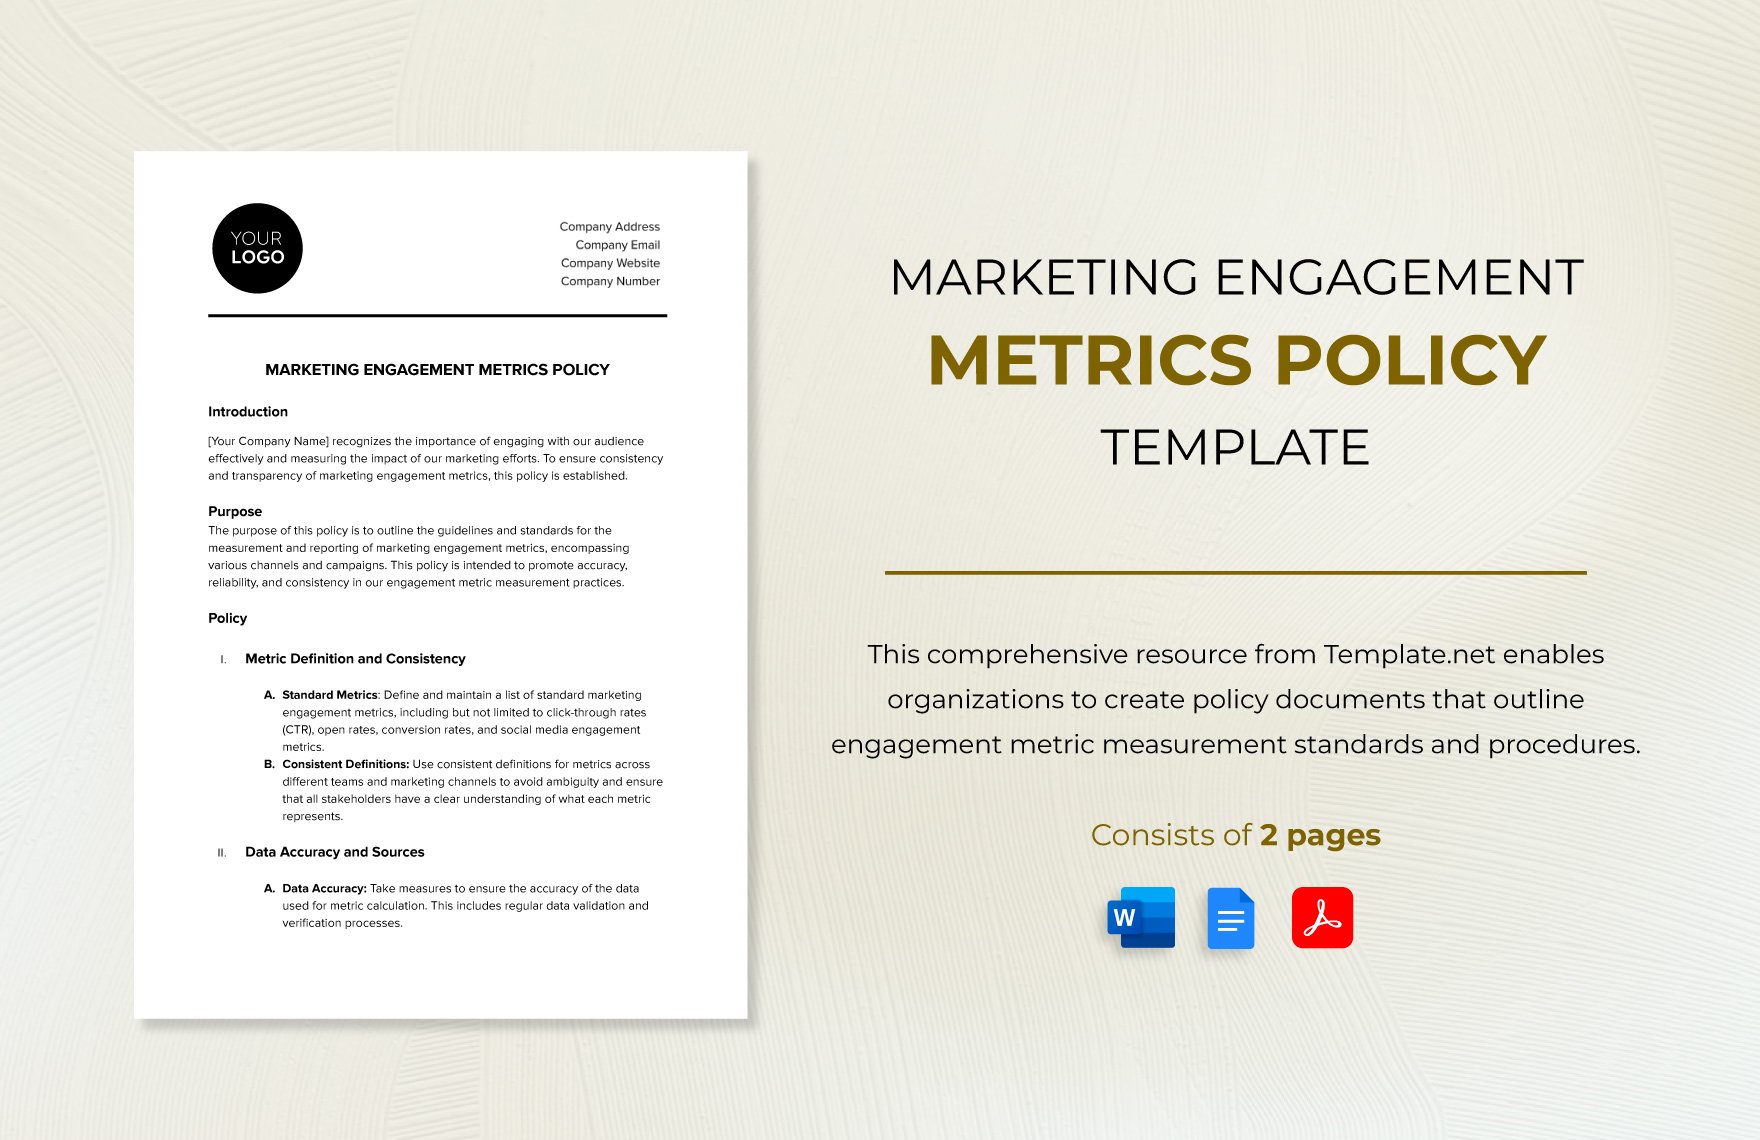 Marketing Engagement Metrics Policy Template